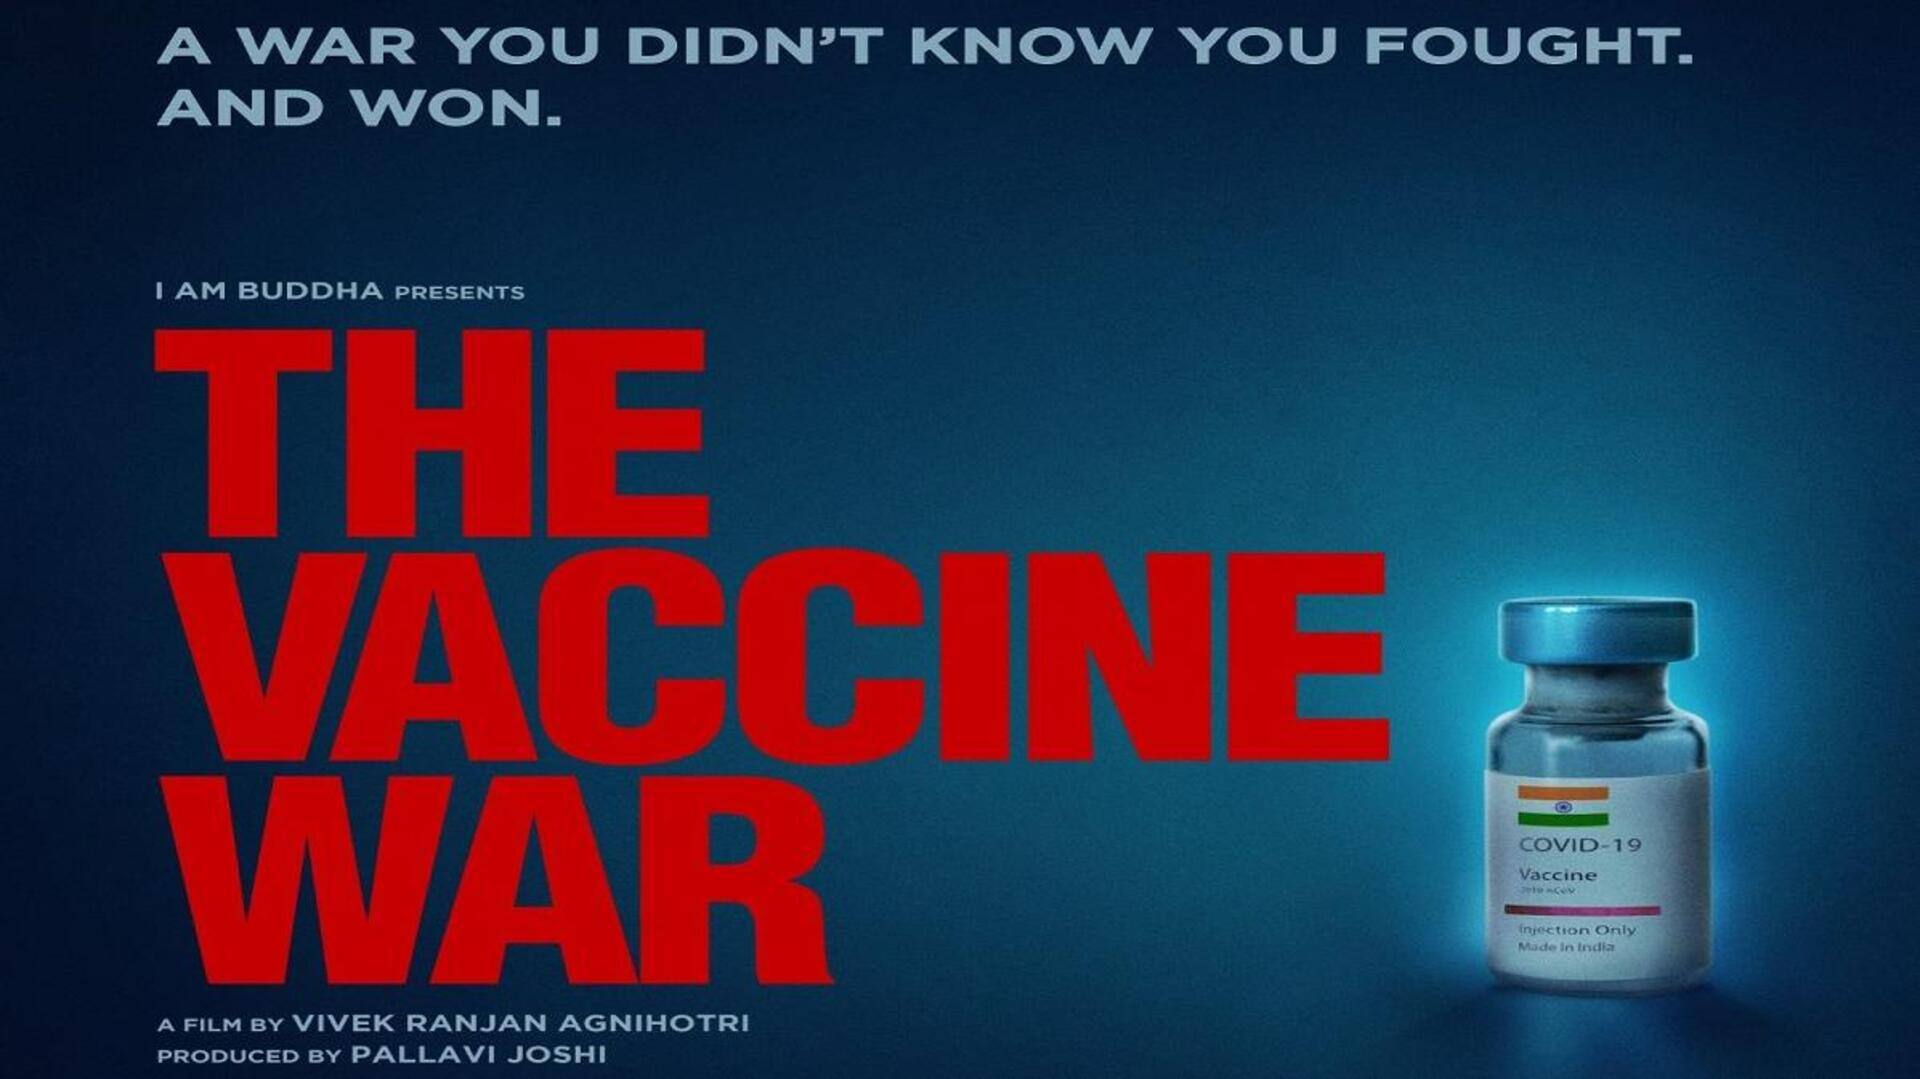 Vivek Agnihotri's 'The Vaccine War' finds place at Oscar library